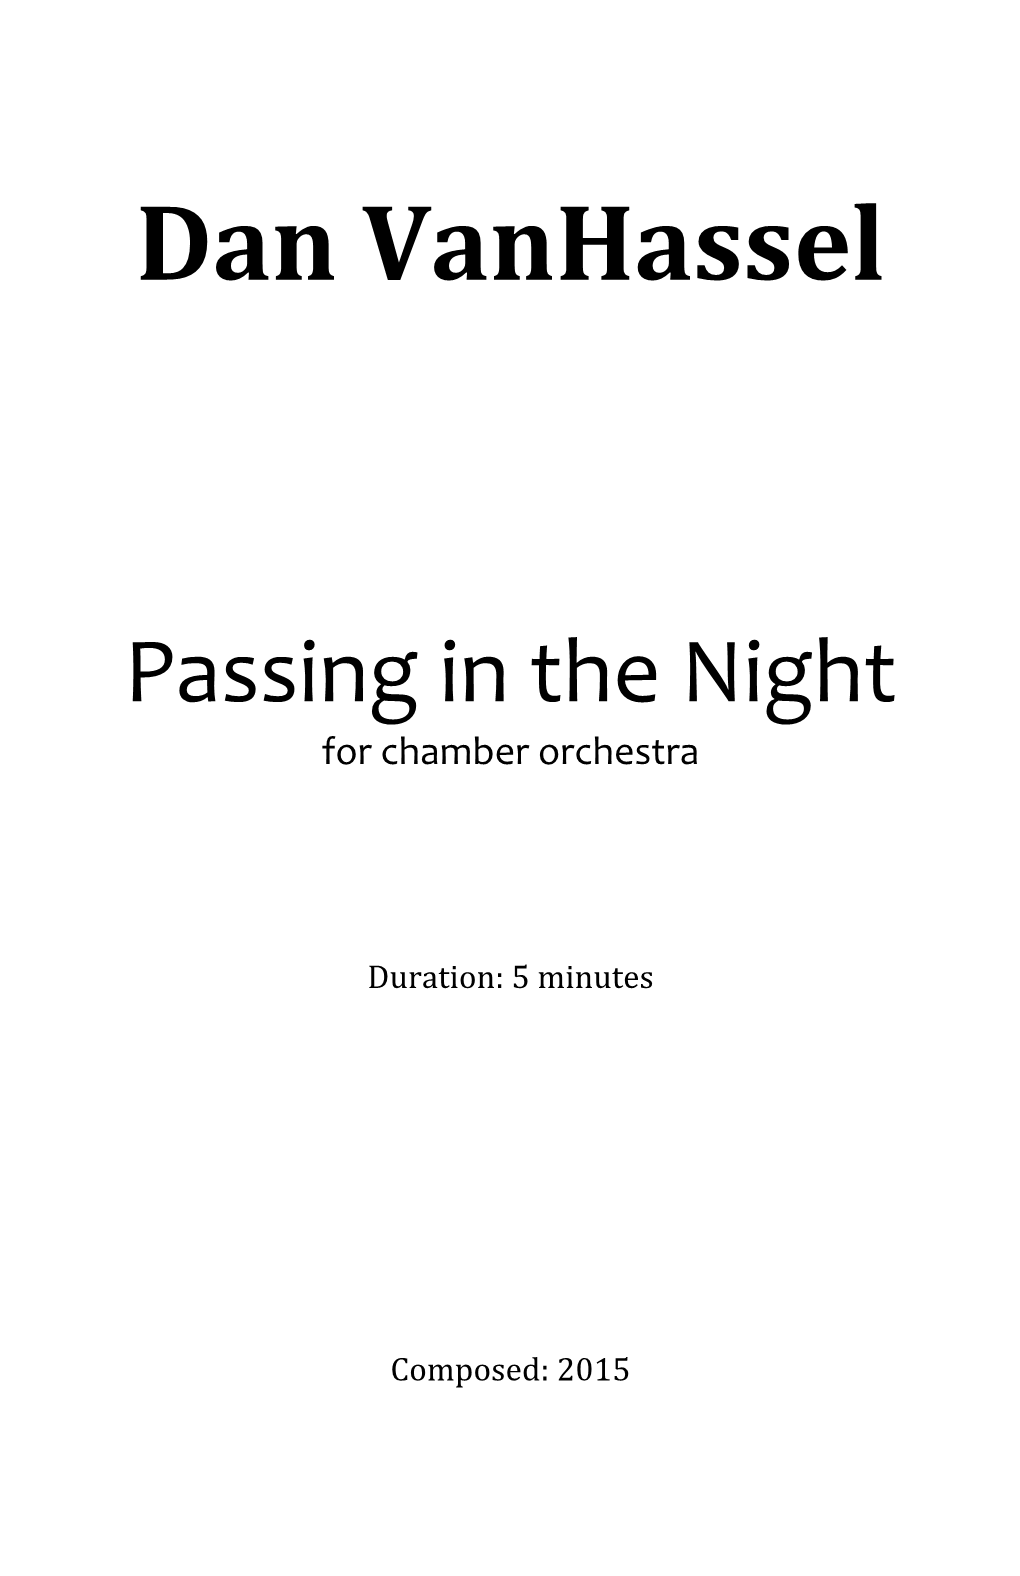 For'chamber'orchestra' ! ! ! ! ! ! ! ! ! ! Duration:!5!Minutes! ! ! ! ! ! ! ! ! ! Composed:!2015!